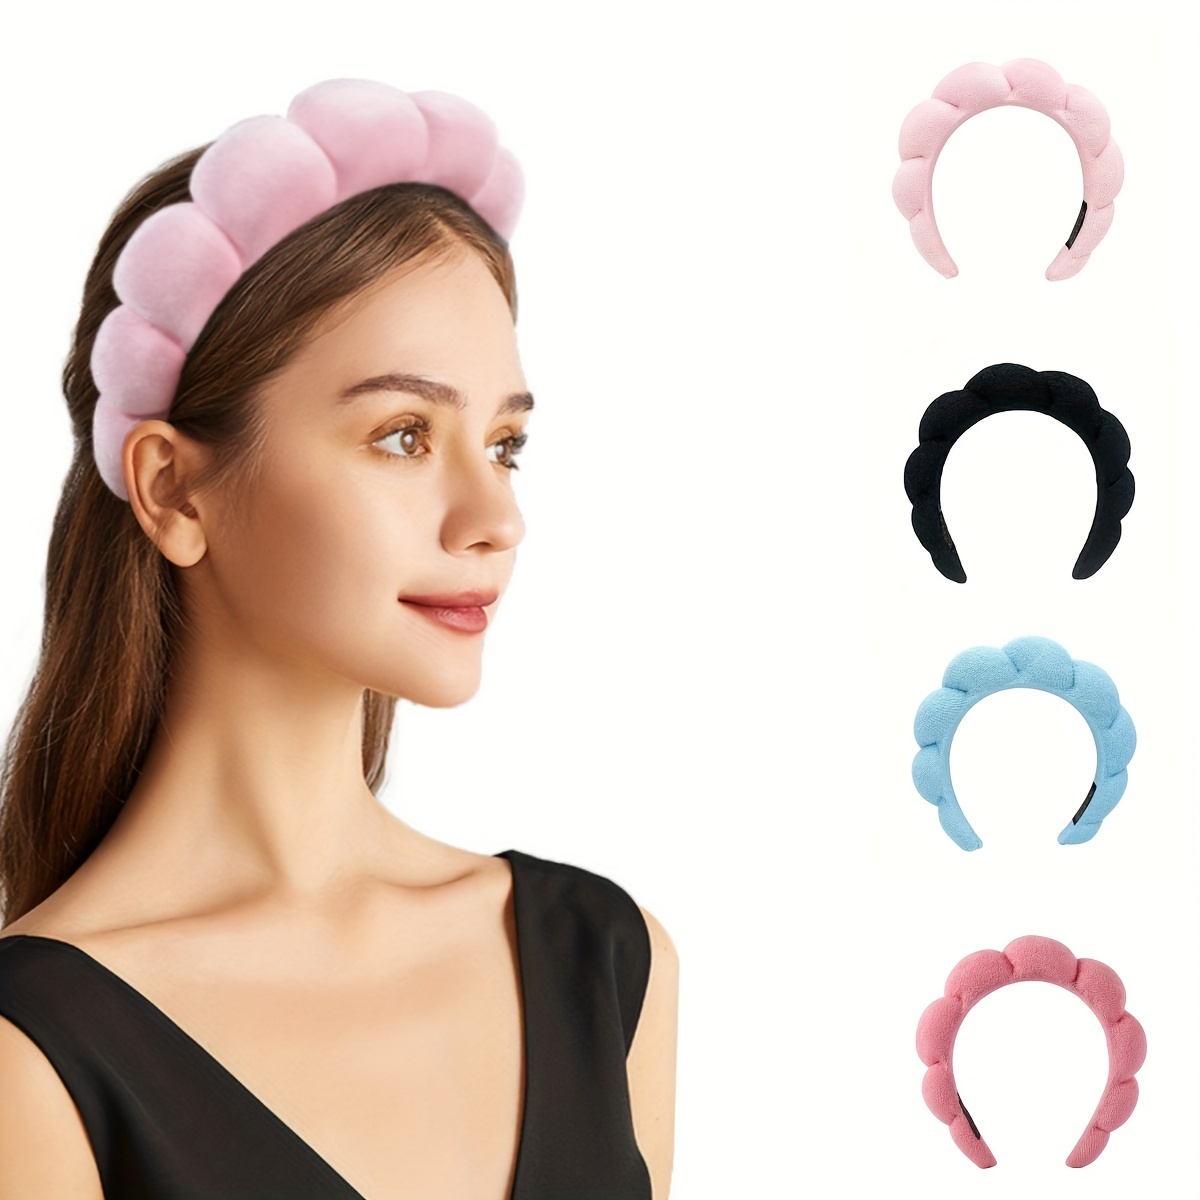 Yohou Pink Spa Makeup Headband for Washing Face with 2PCS Wristband  Scrunchies Mimi and Co Spa Headband Puffy for Bubble Skincare Makeup Shower  Hair